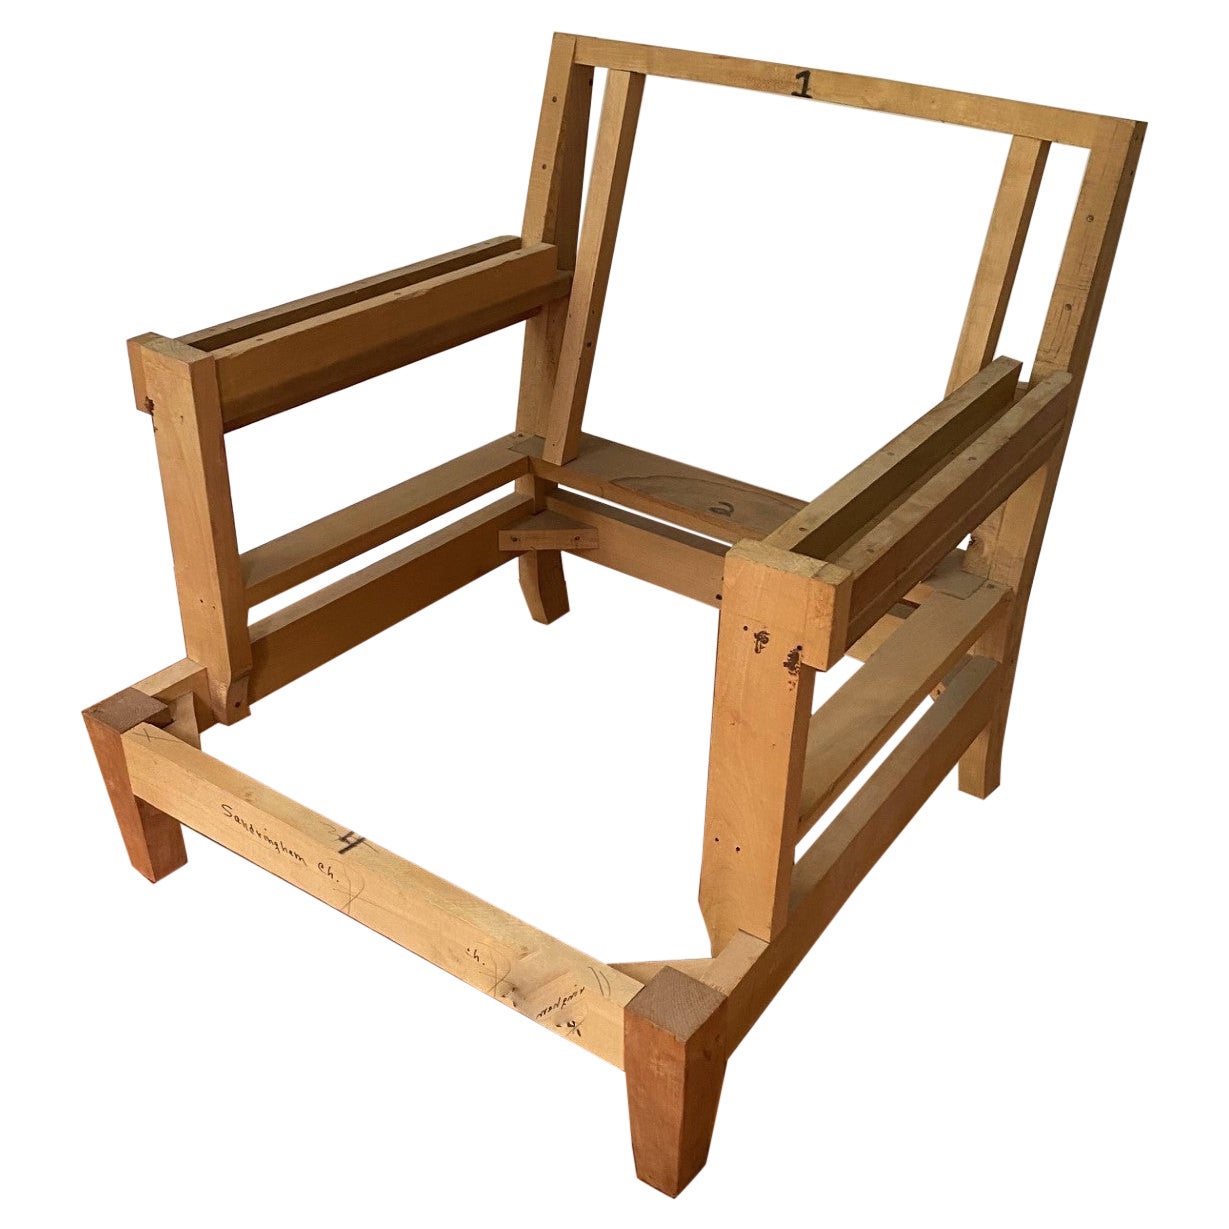 New Kiln-Dried Maple Lawson Style Lounge Chair Frame with Mahogany Legs.